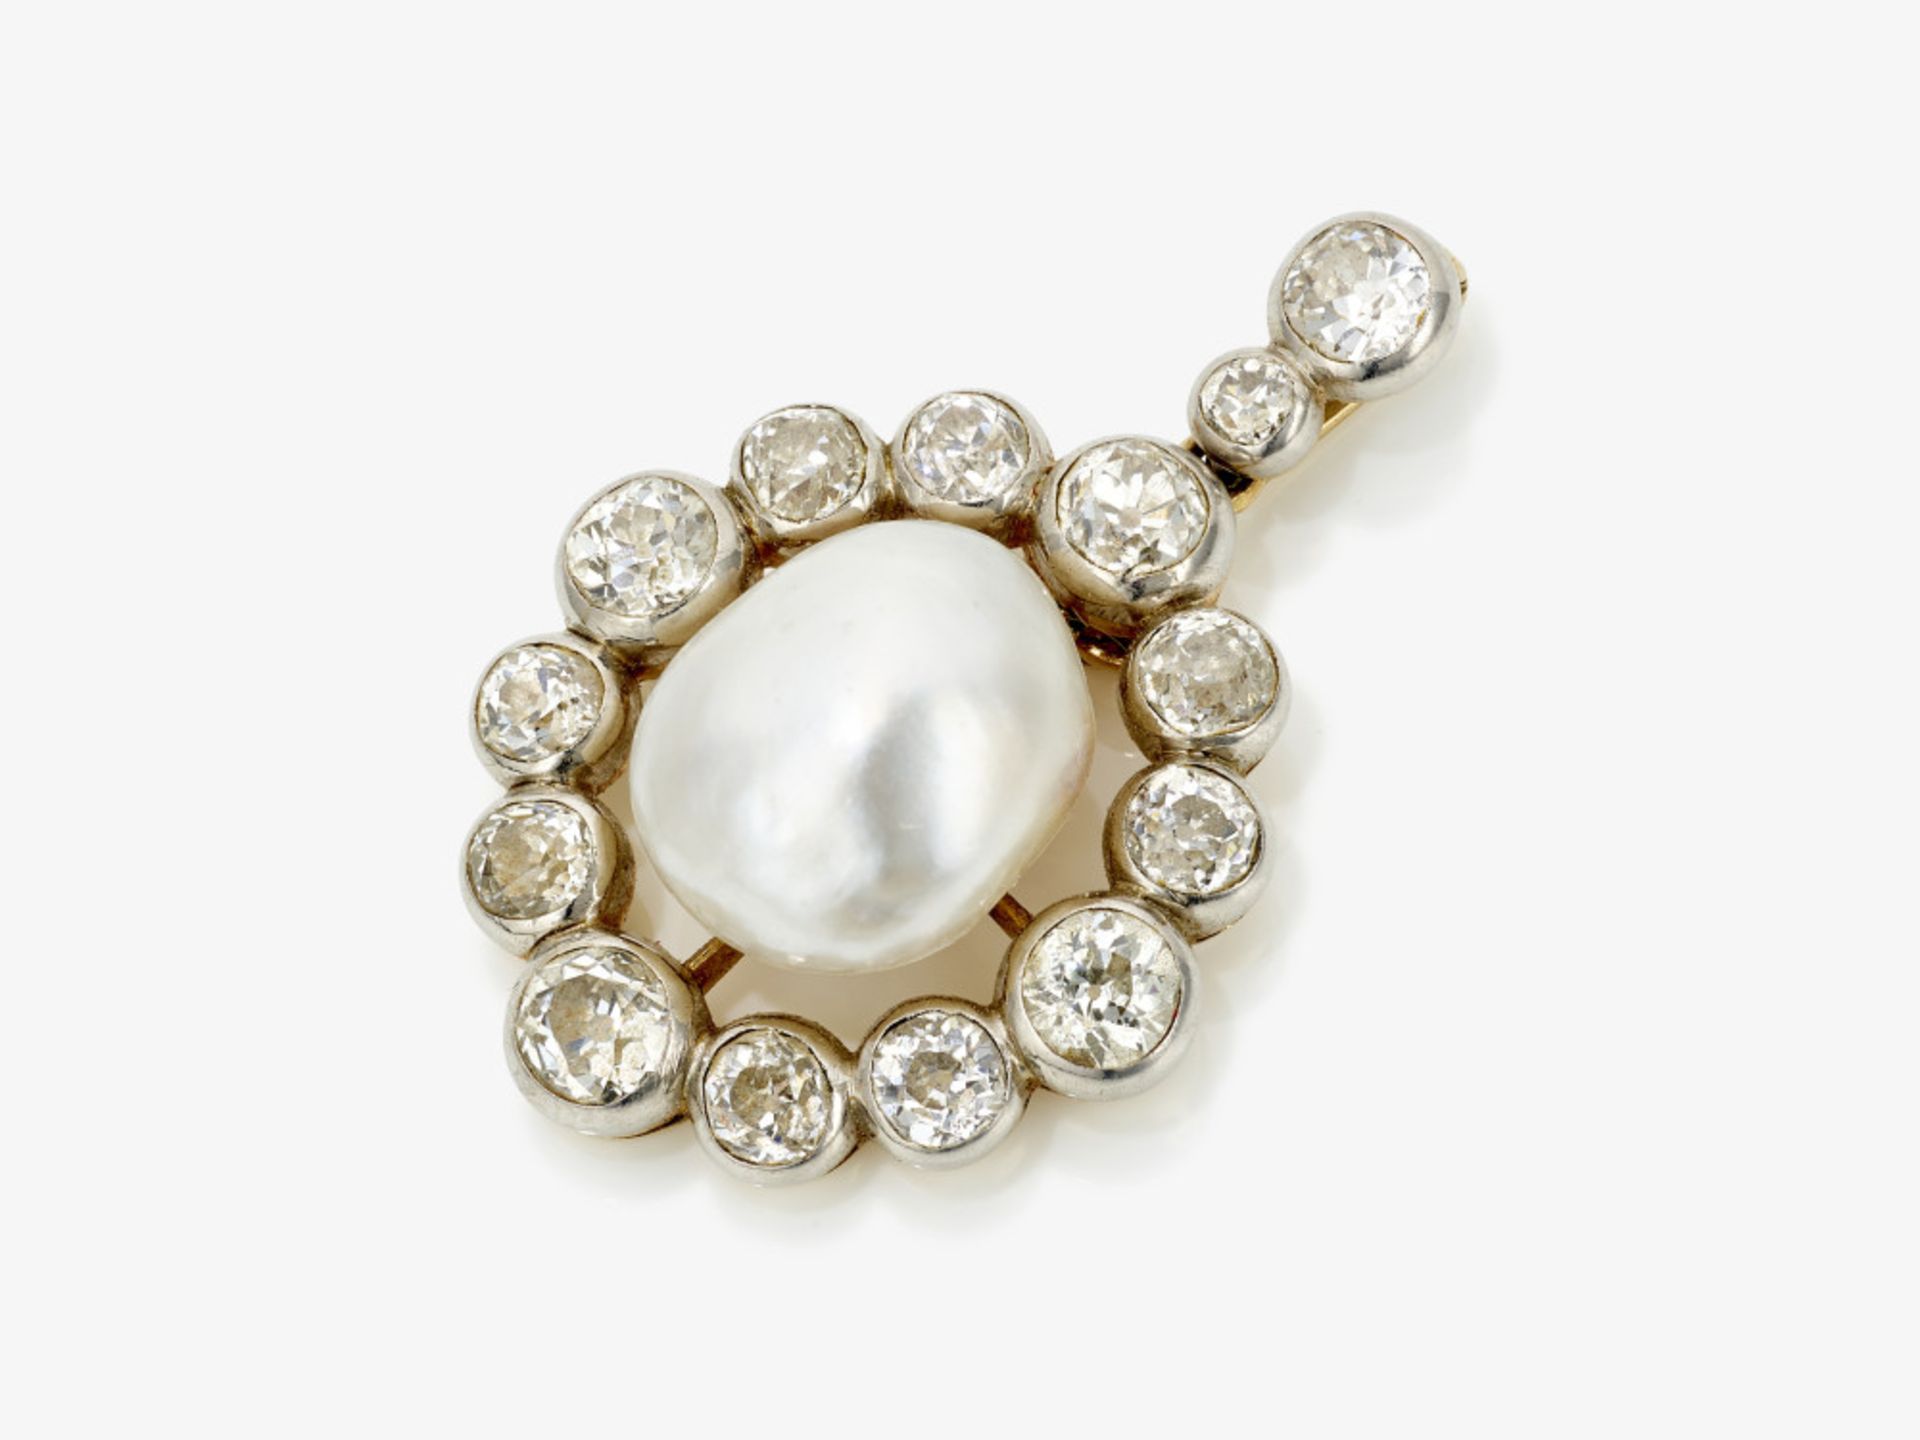 A pendant with a large cultured pearl and diamonds - Image 2 of 4